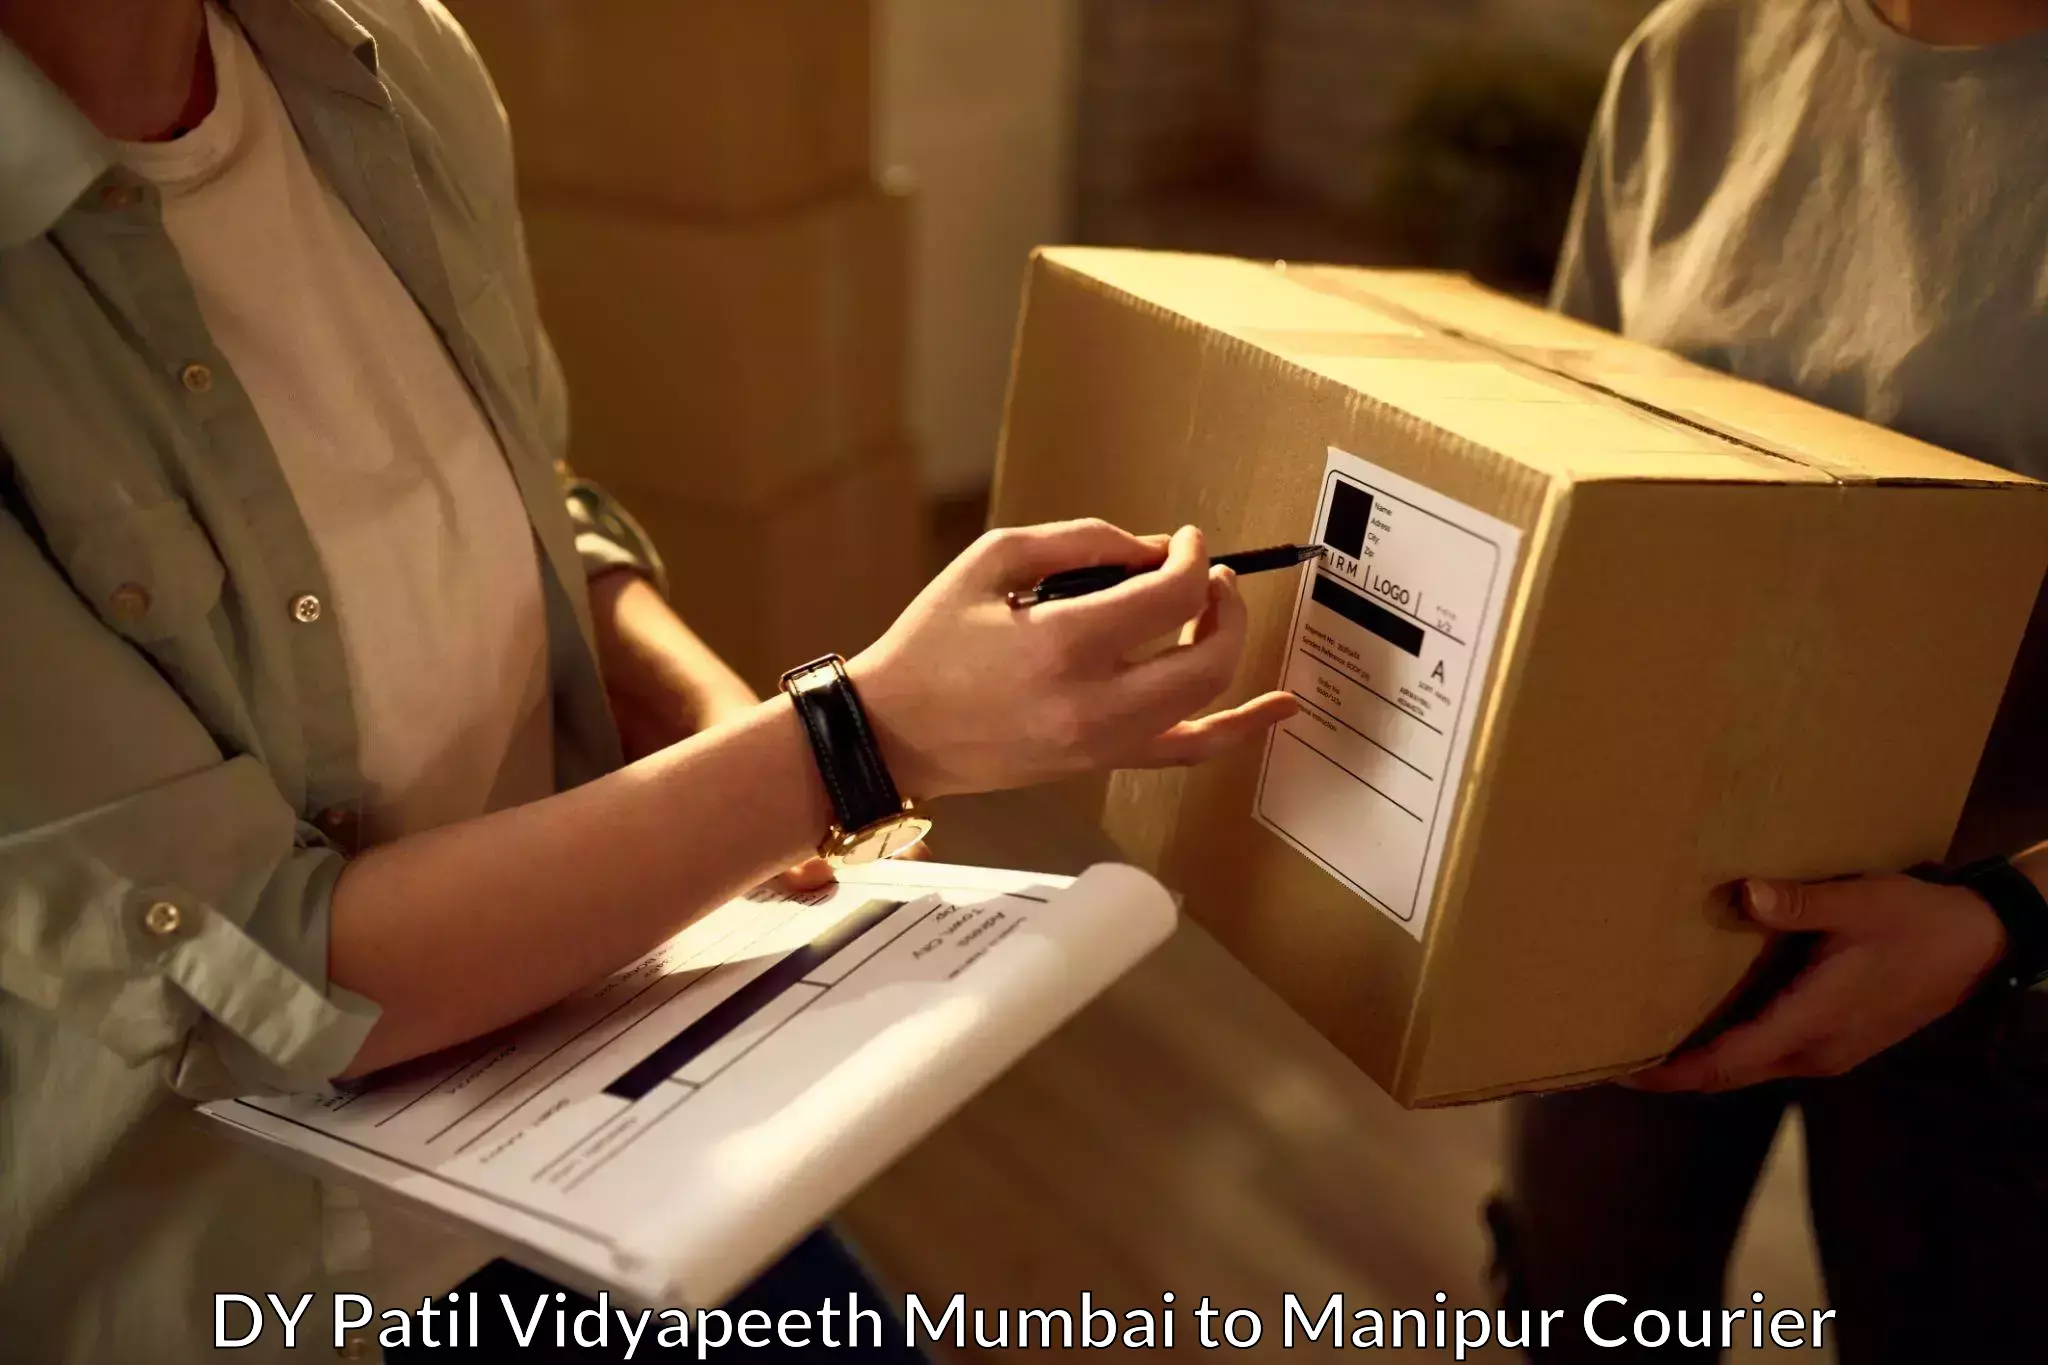 Package delivery network DY Patil Vidyapeeth Mumbai to Thoubal